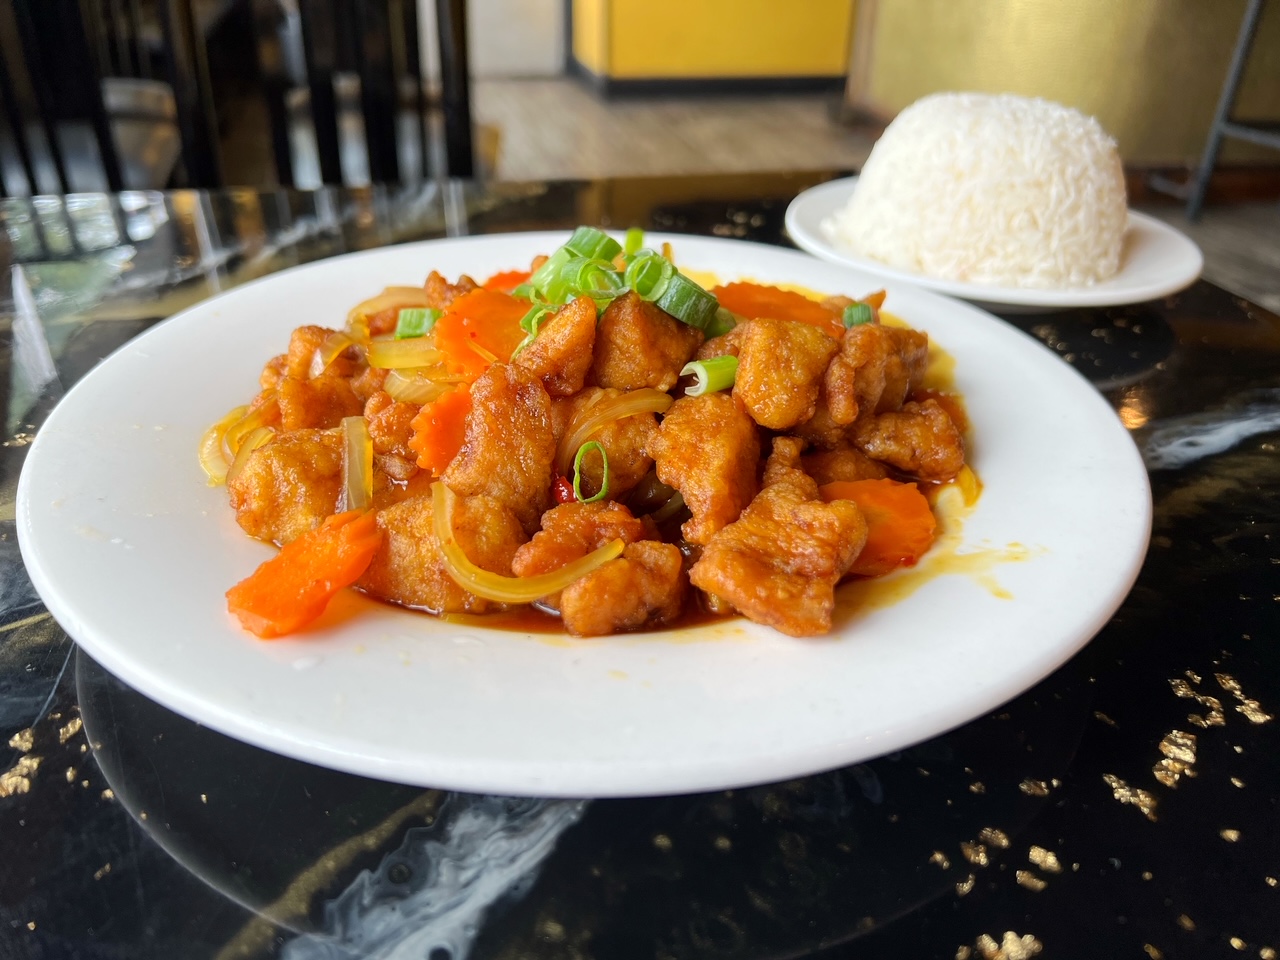 On a black table, there is a white plate with Sticky Rice's General Tso's chicken with carrots. Photo by Alyssa Buckley.